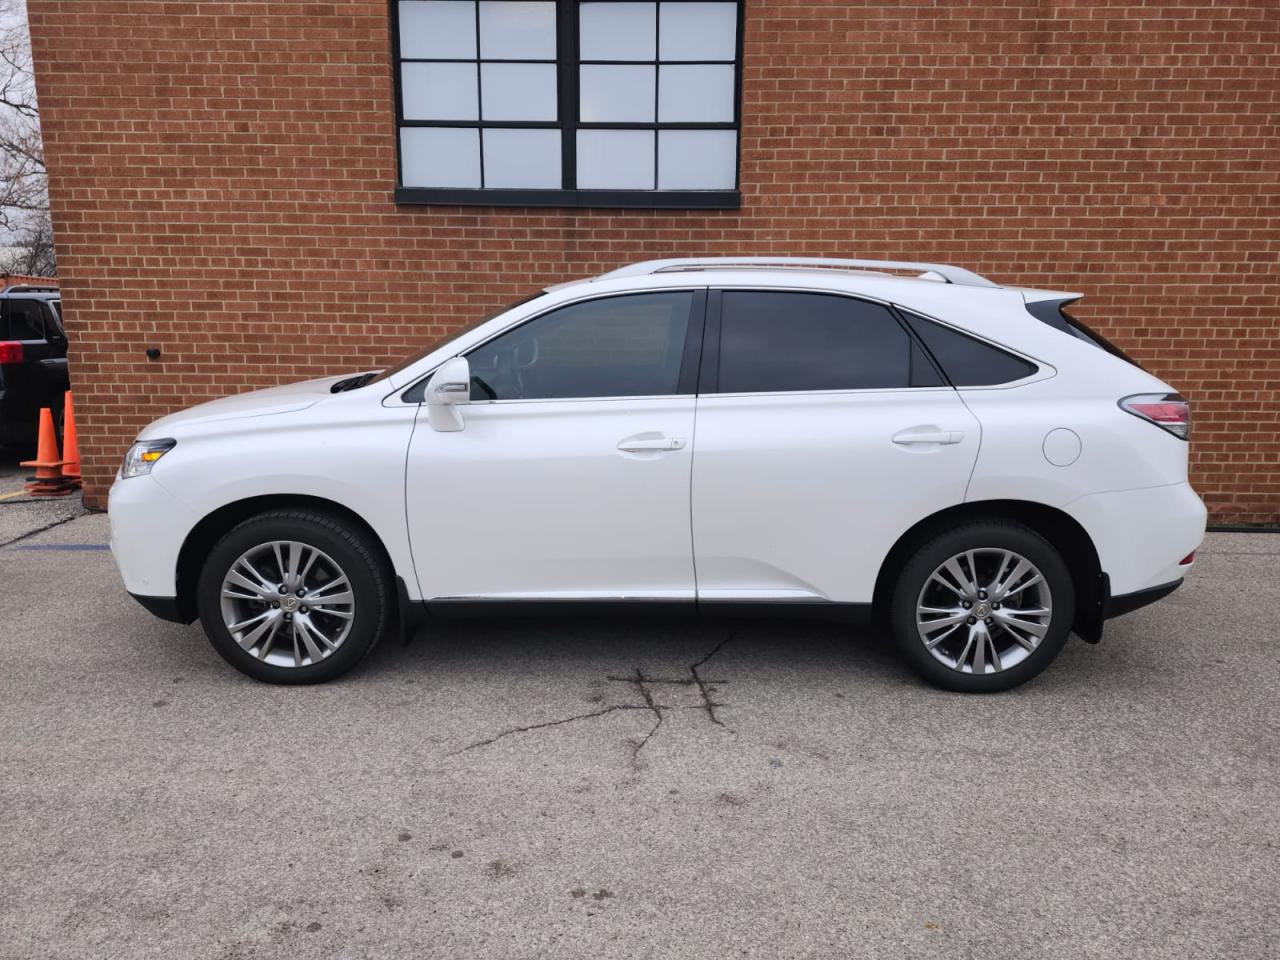 2014 Lexus RX 350 No Accident, Certified, AWD, Navigation - Photo #9